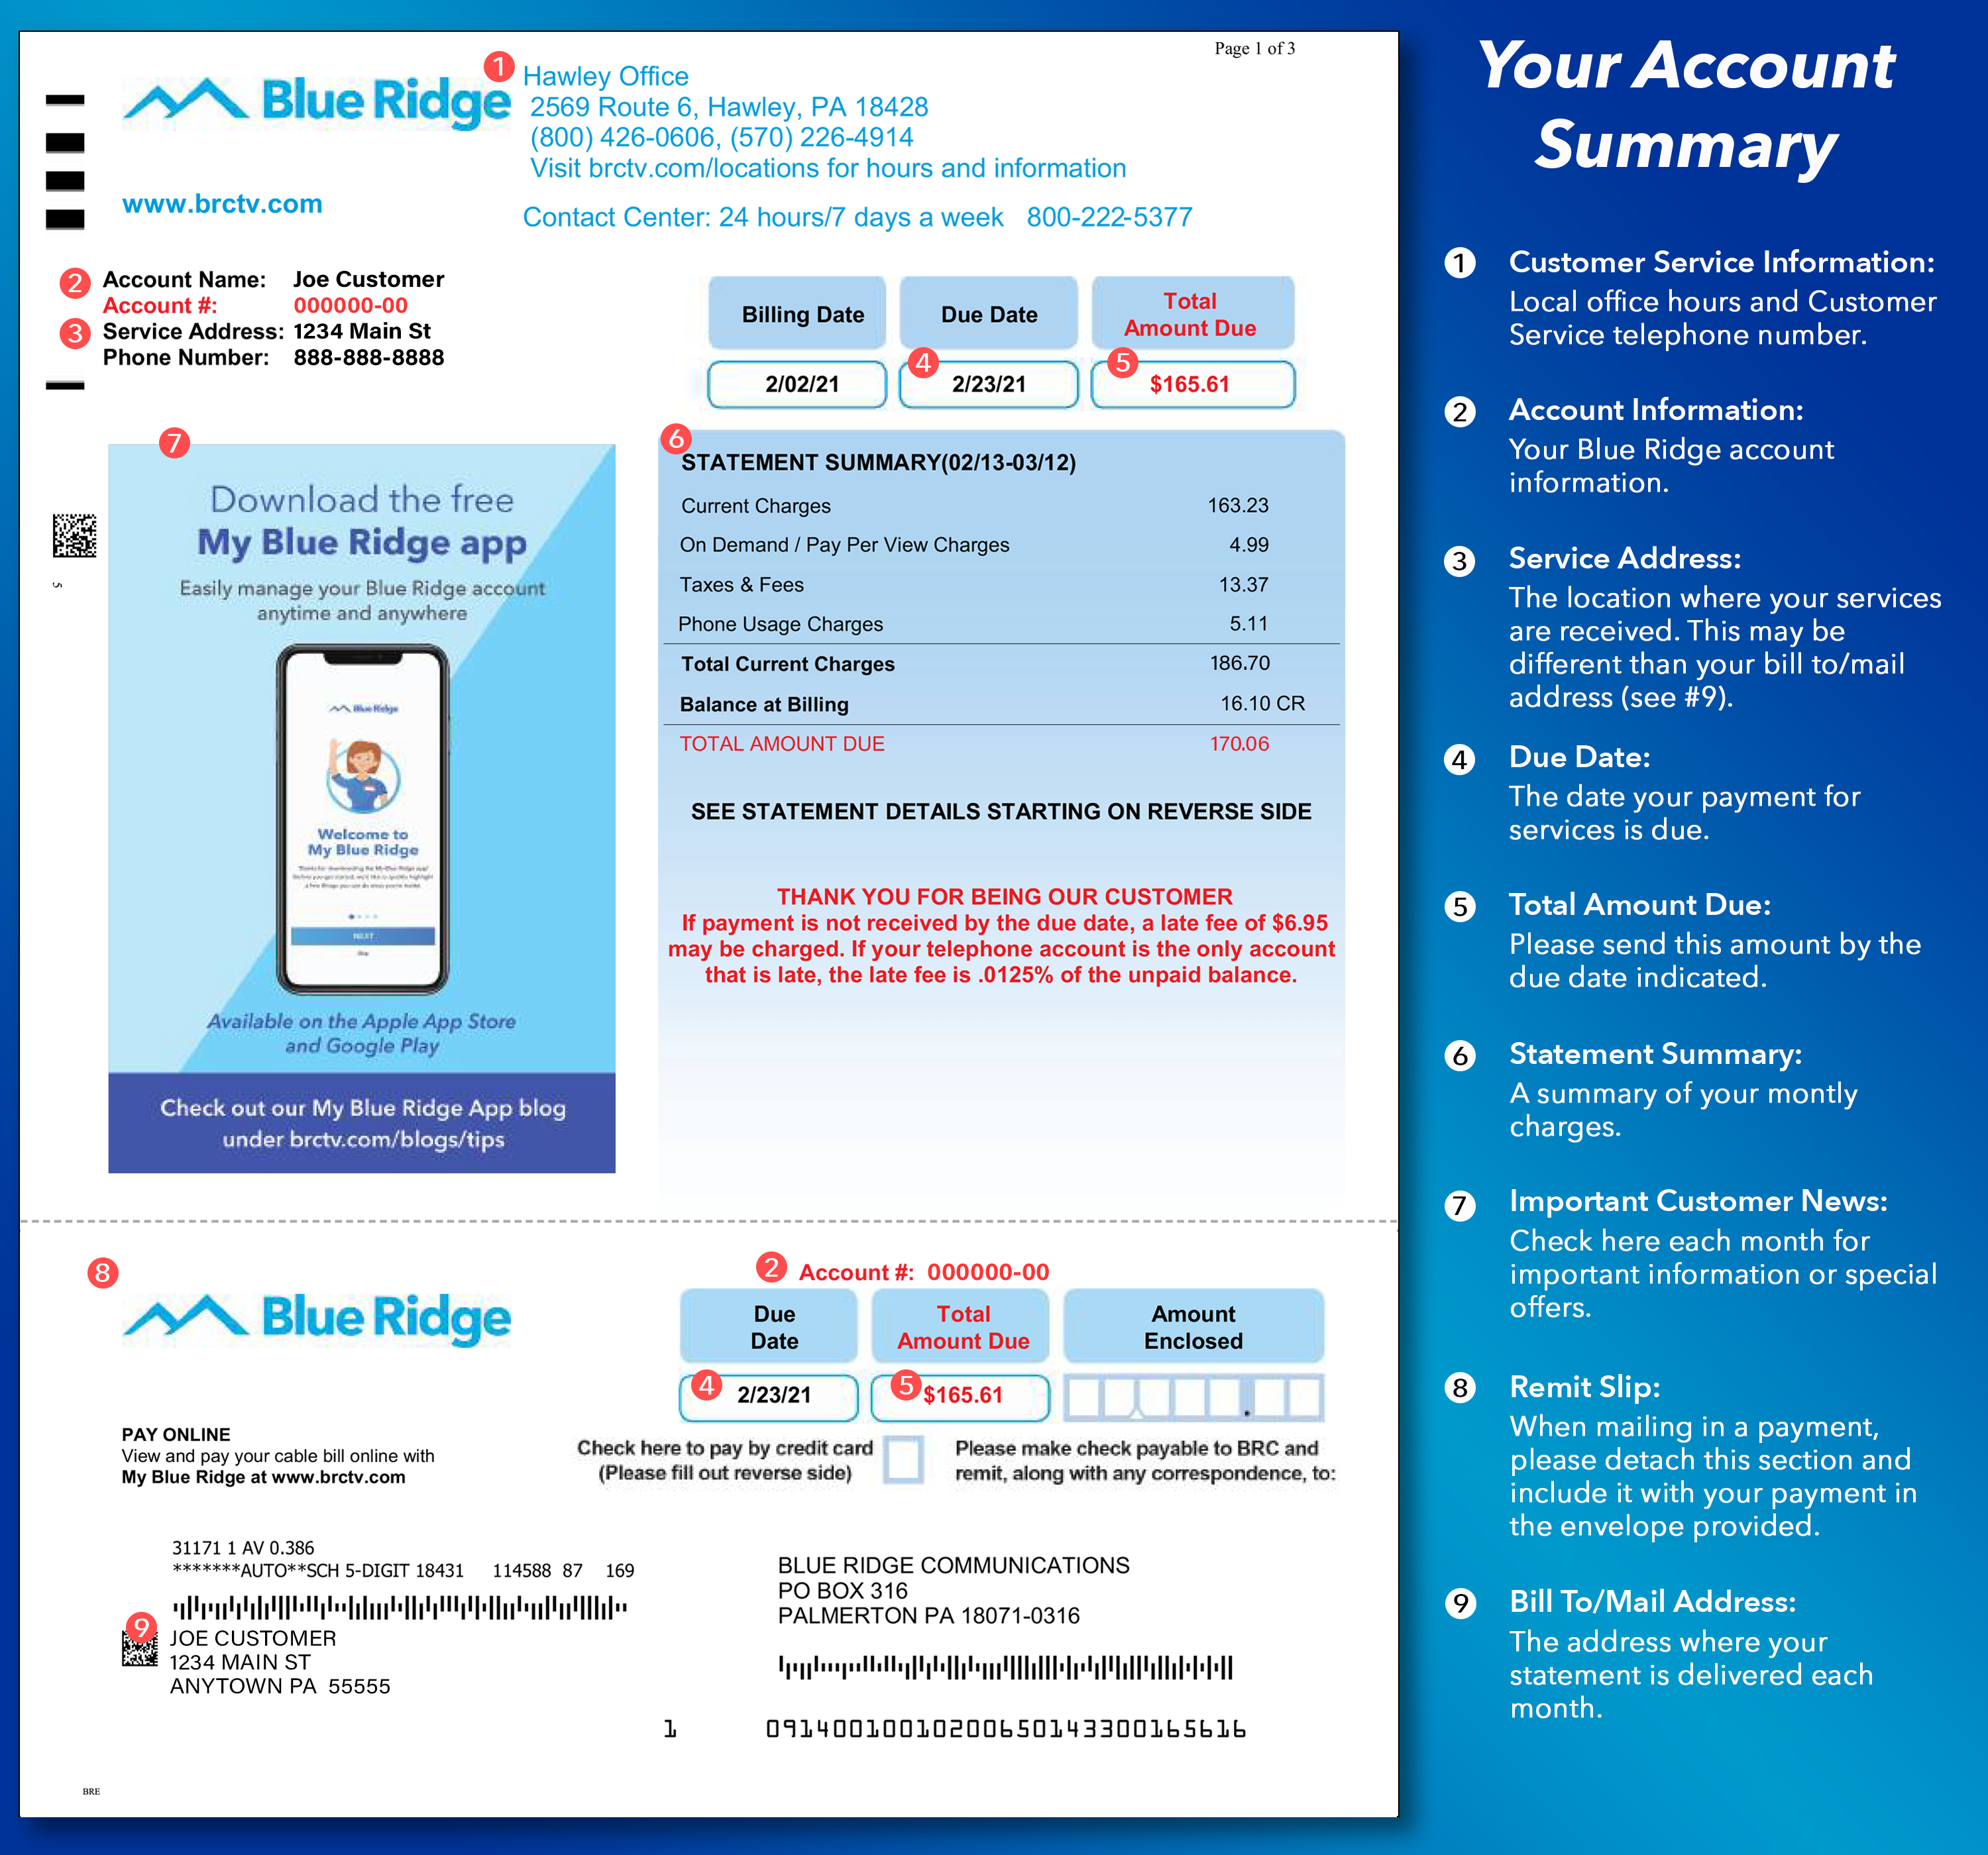 How to Read Your Blue Ridge Bill - page 1